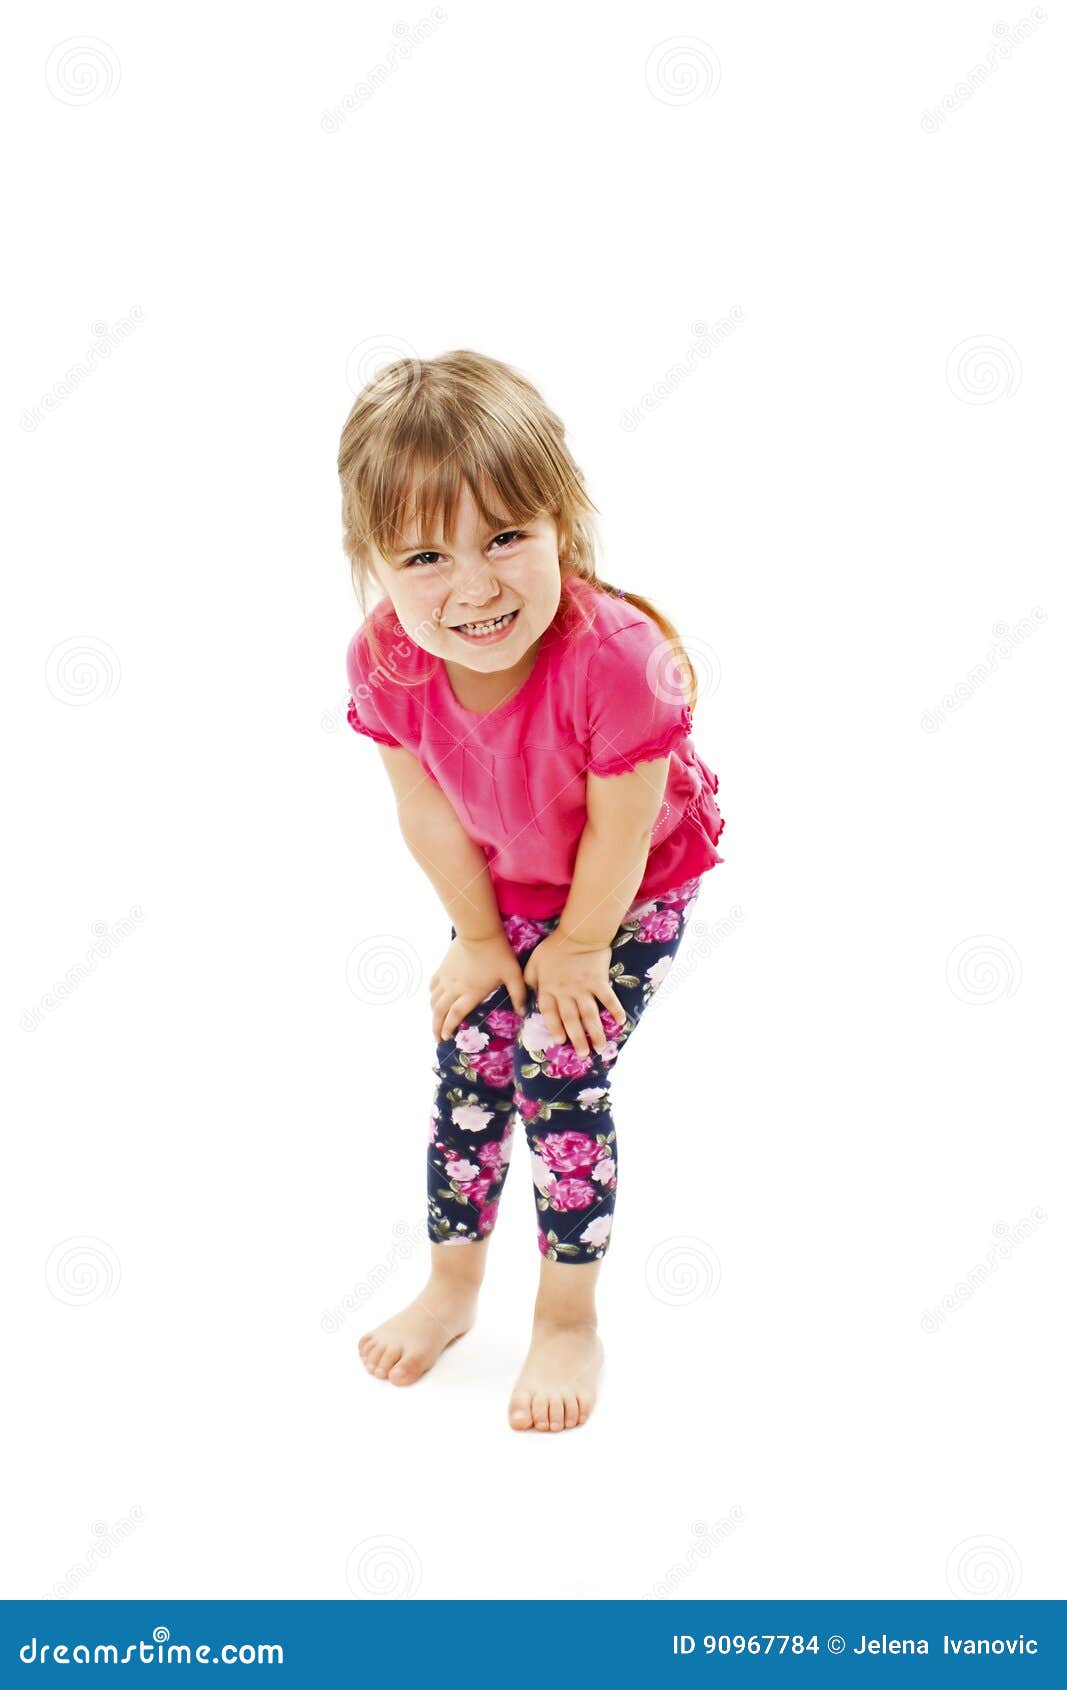 324 Little Girl Pee Photos Free Royalty Free Stock Photos From Dreamstime